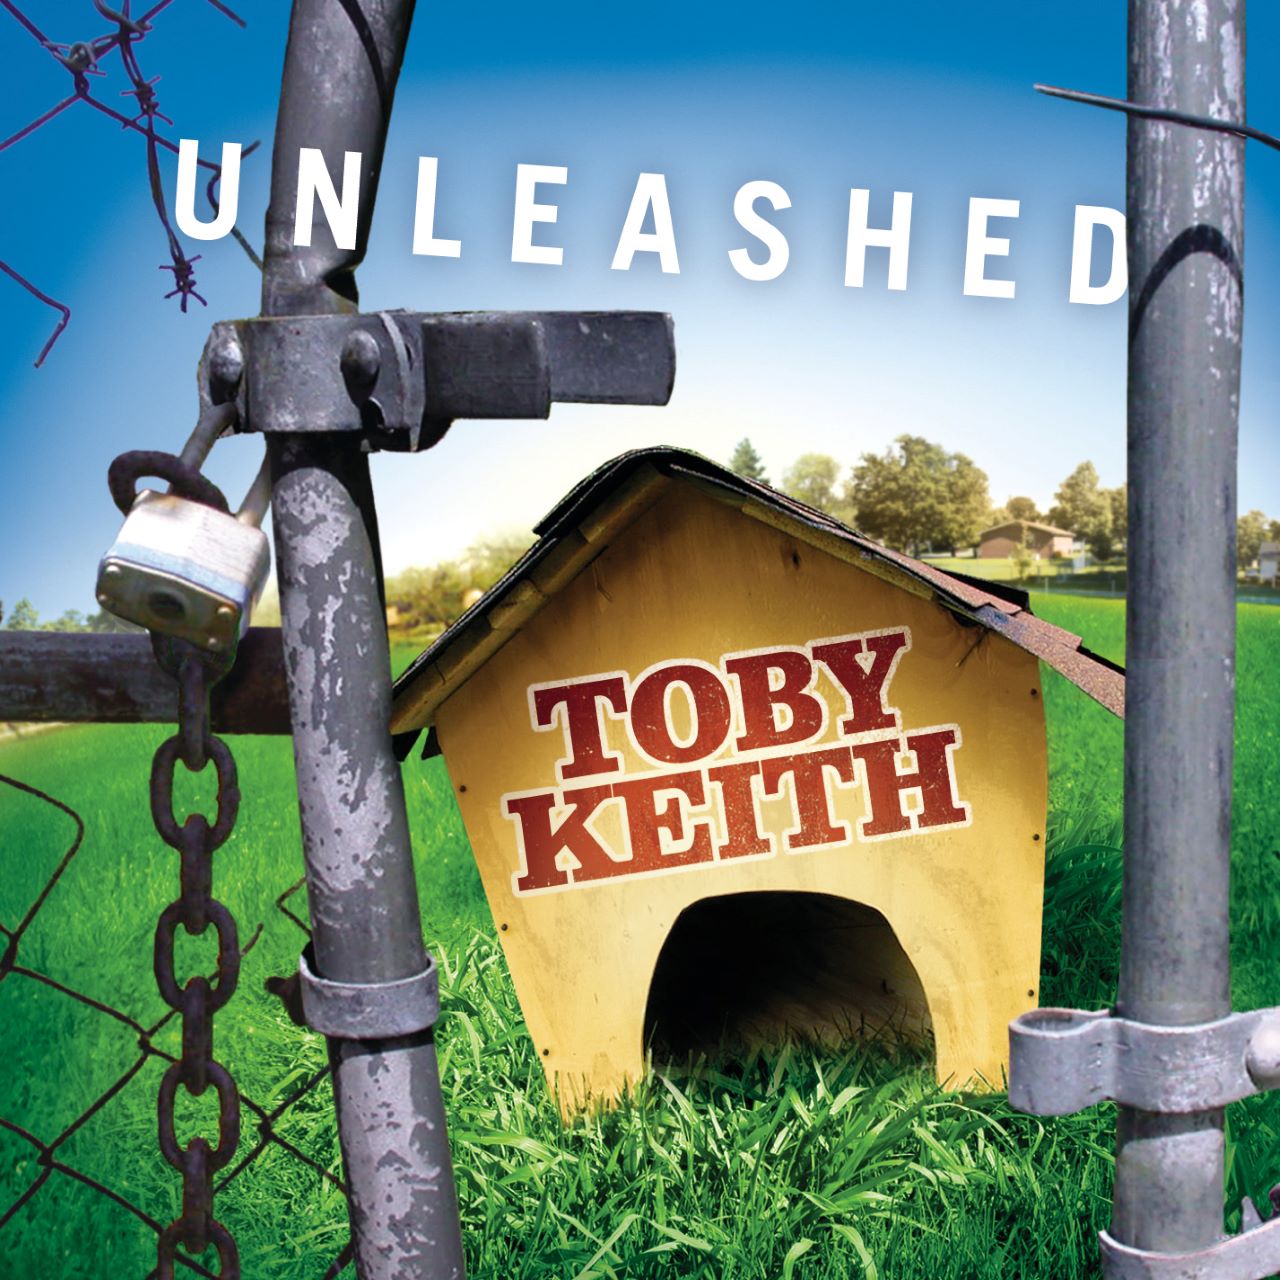 Toby Keith - Unleashed cover album